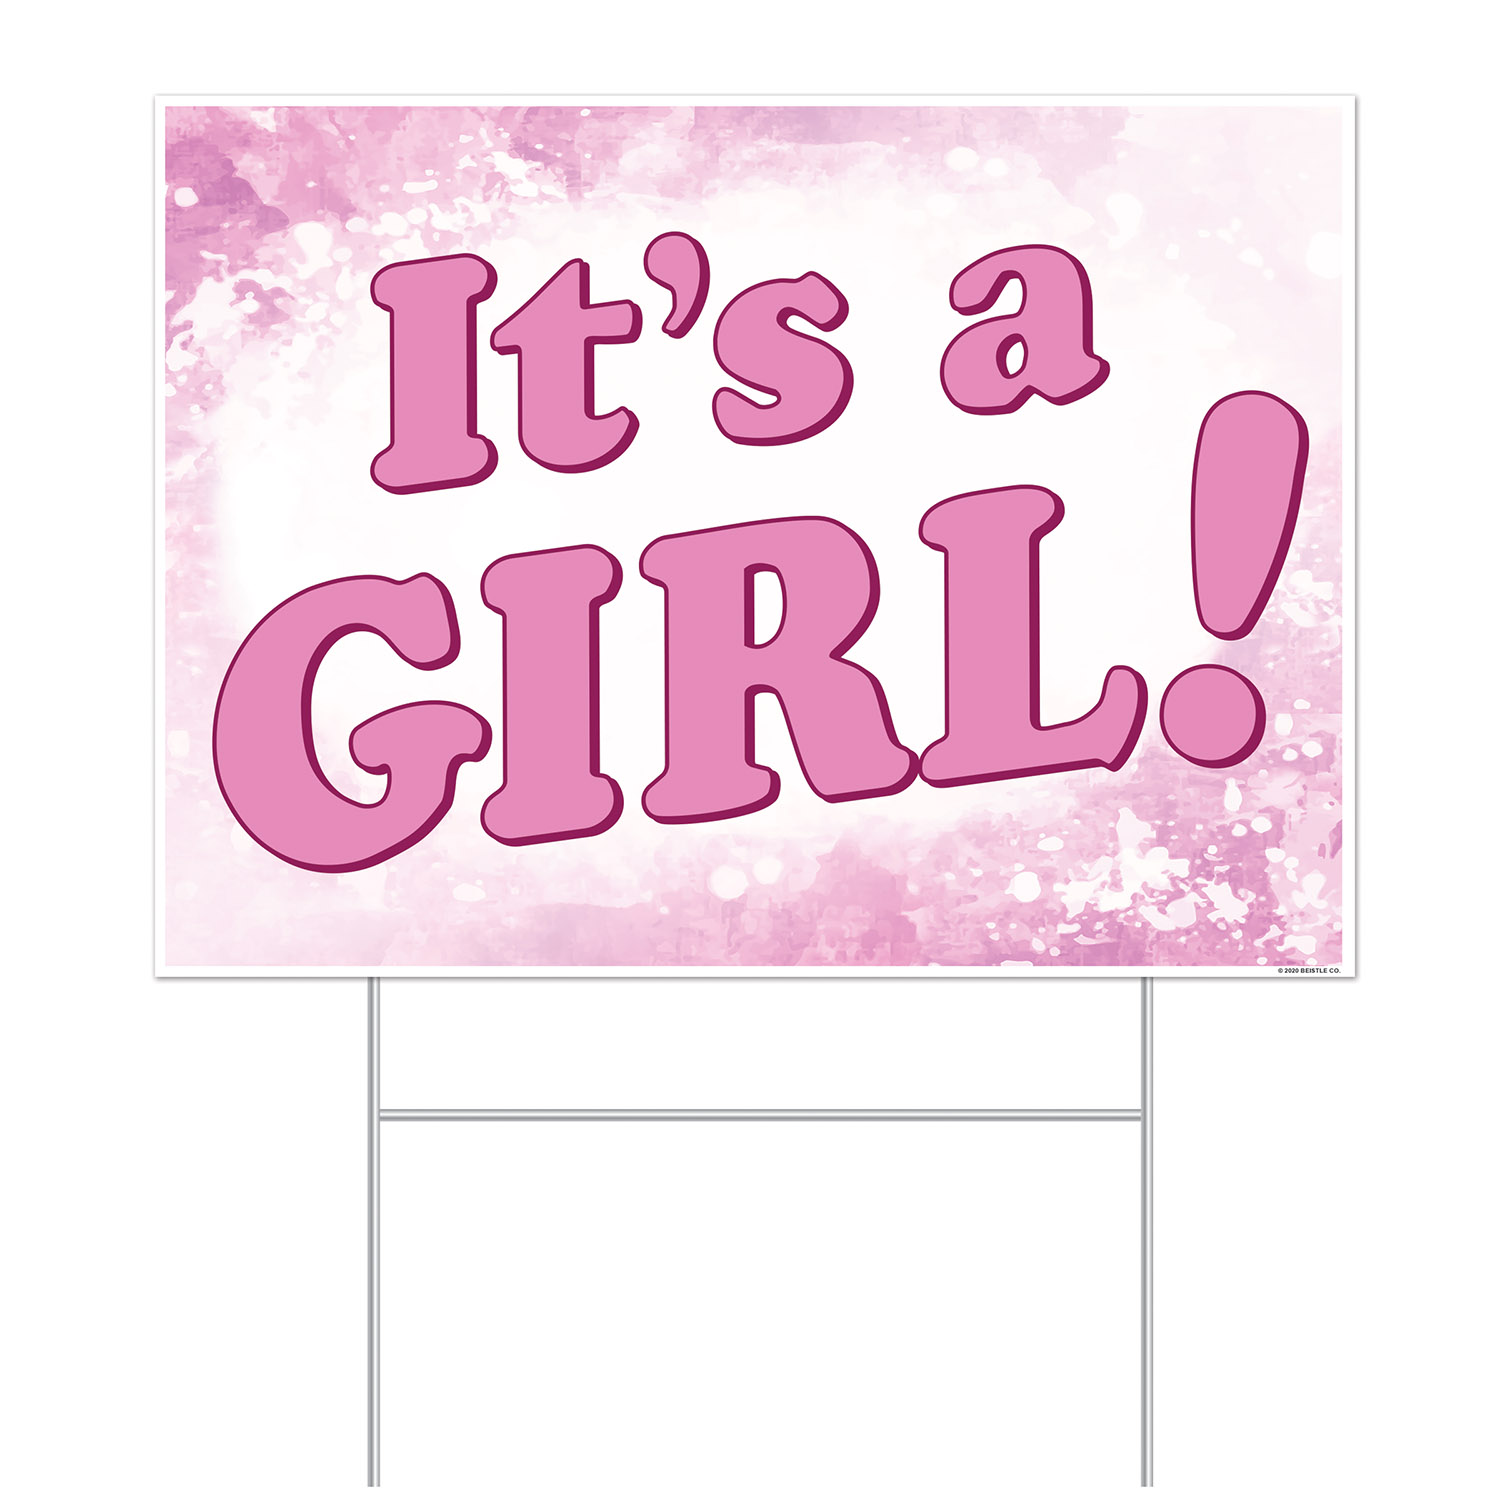 Plastic It's A Girl! Yard SIGN